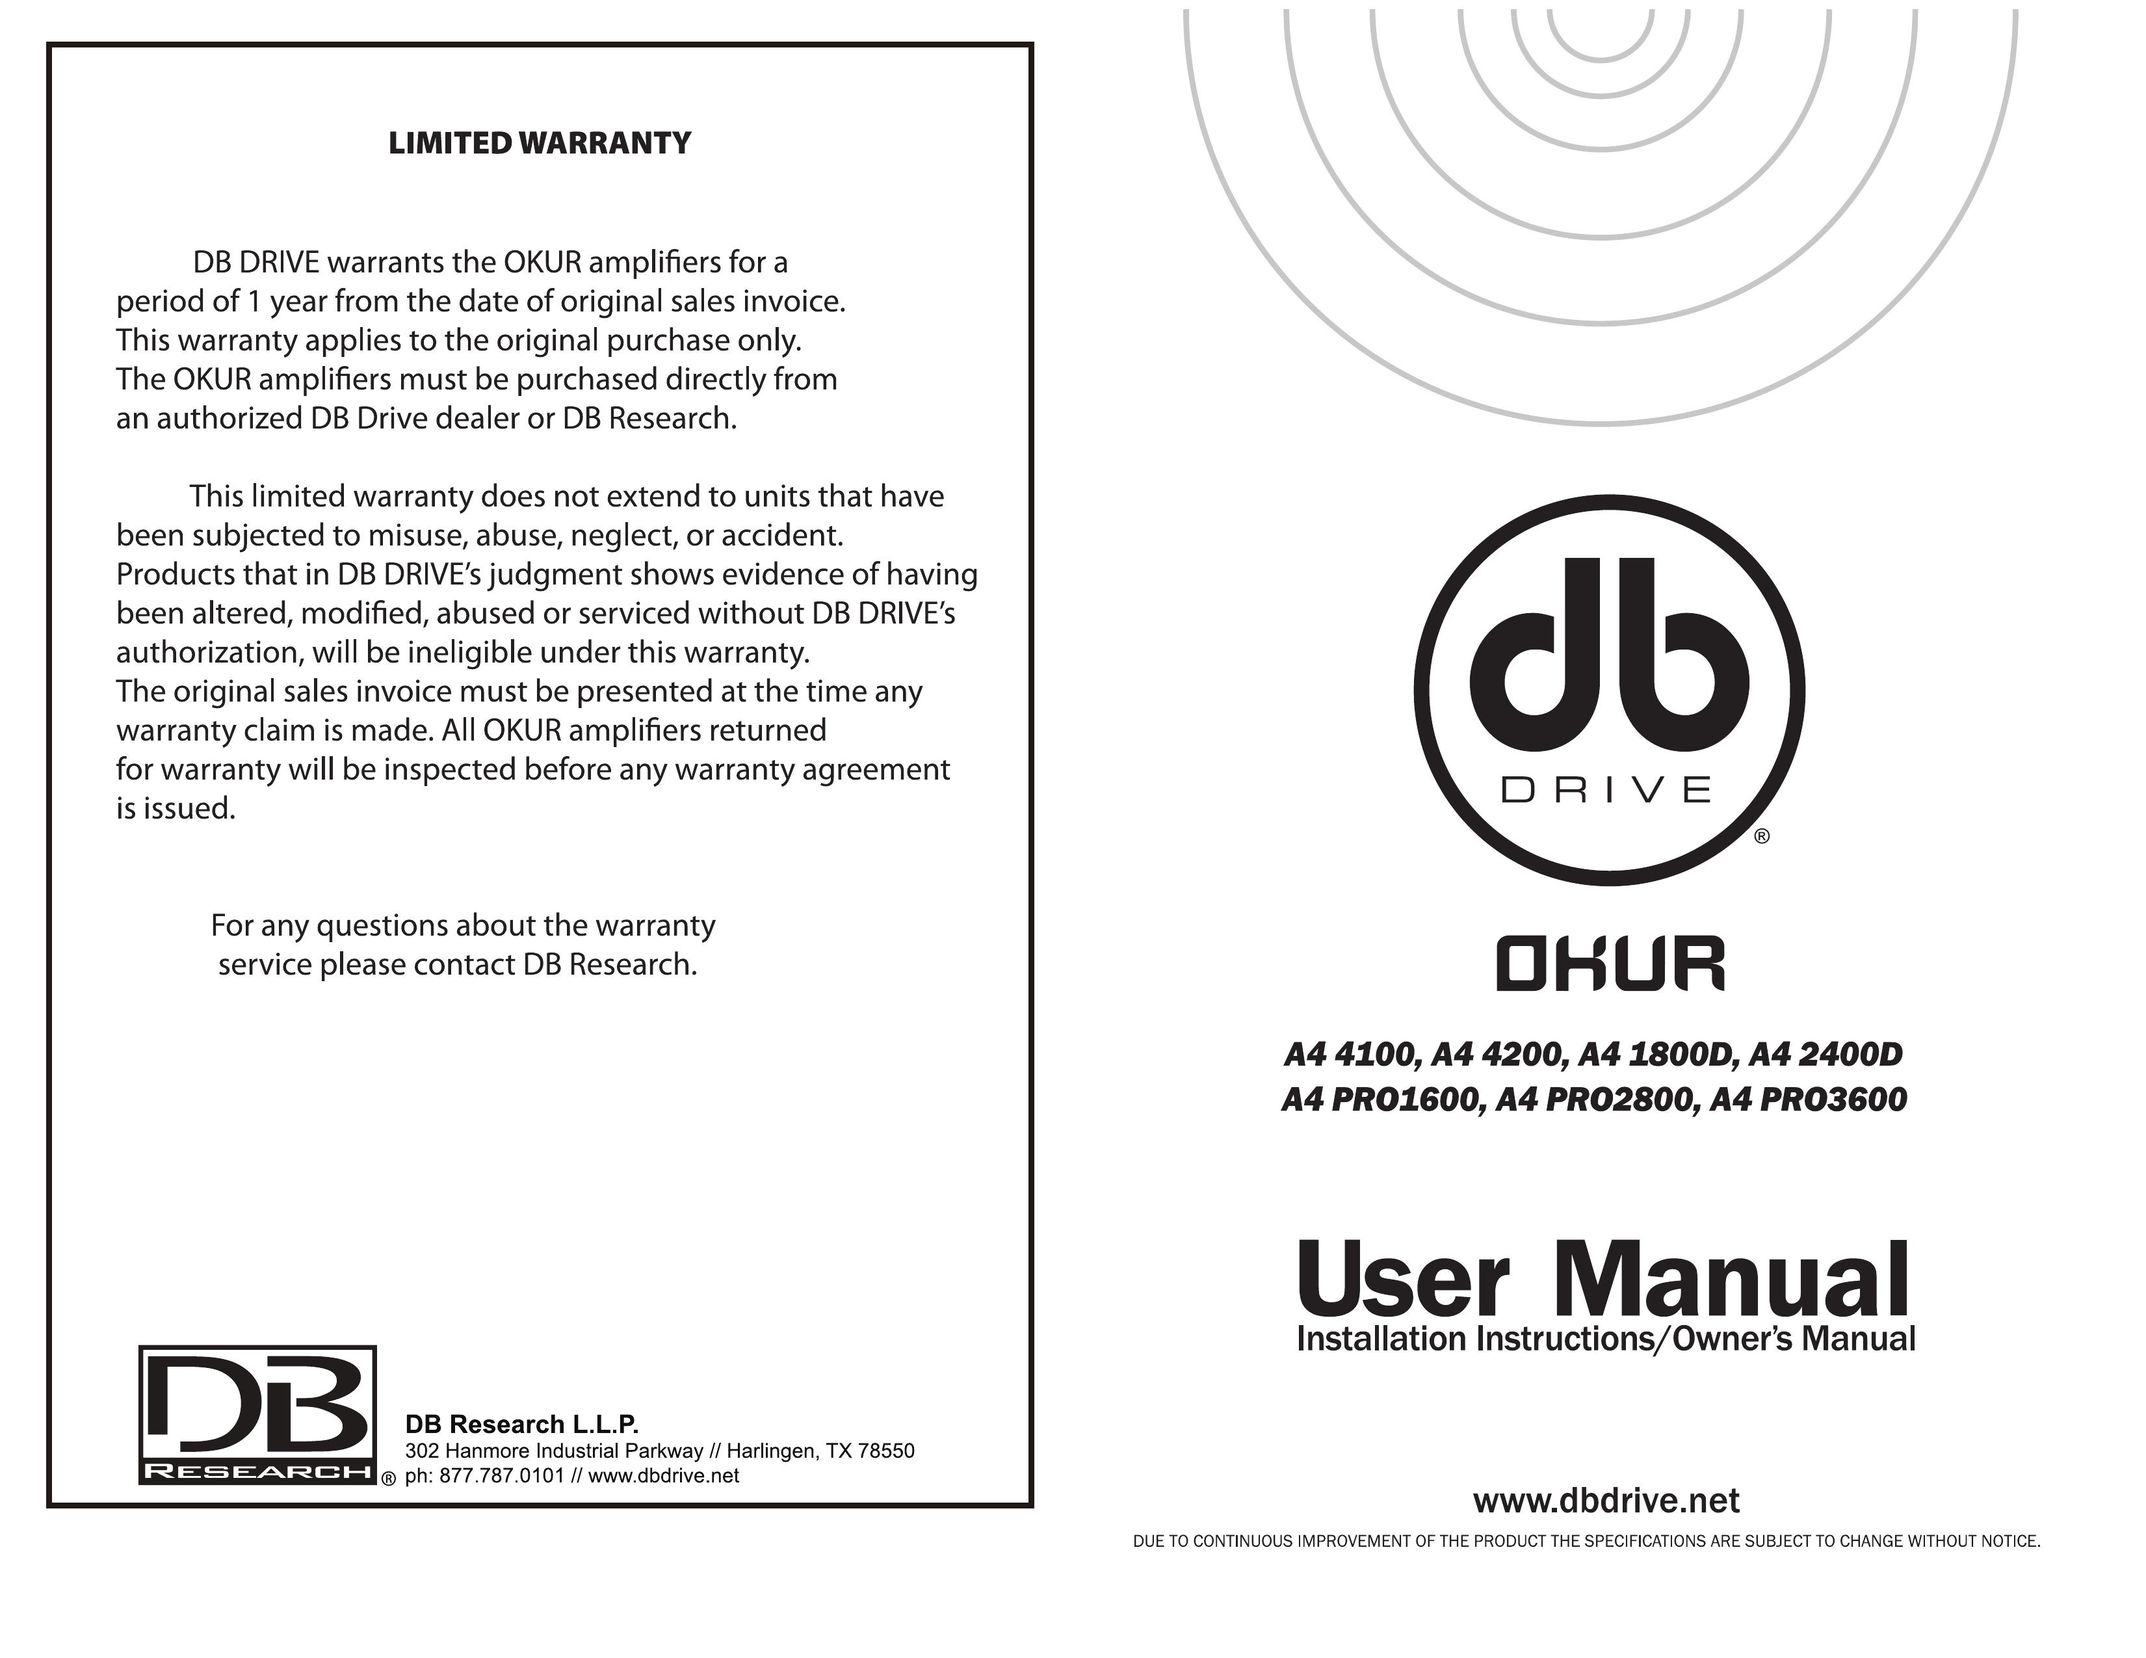 DB Industries A4 1800D Stereo Amplifier User Manual